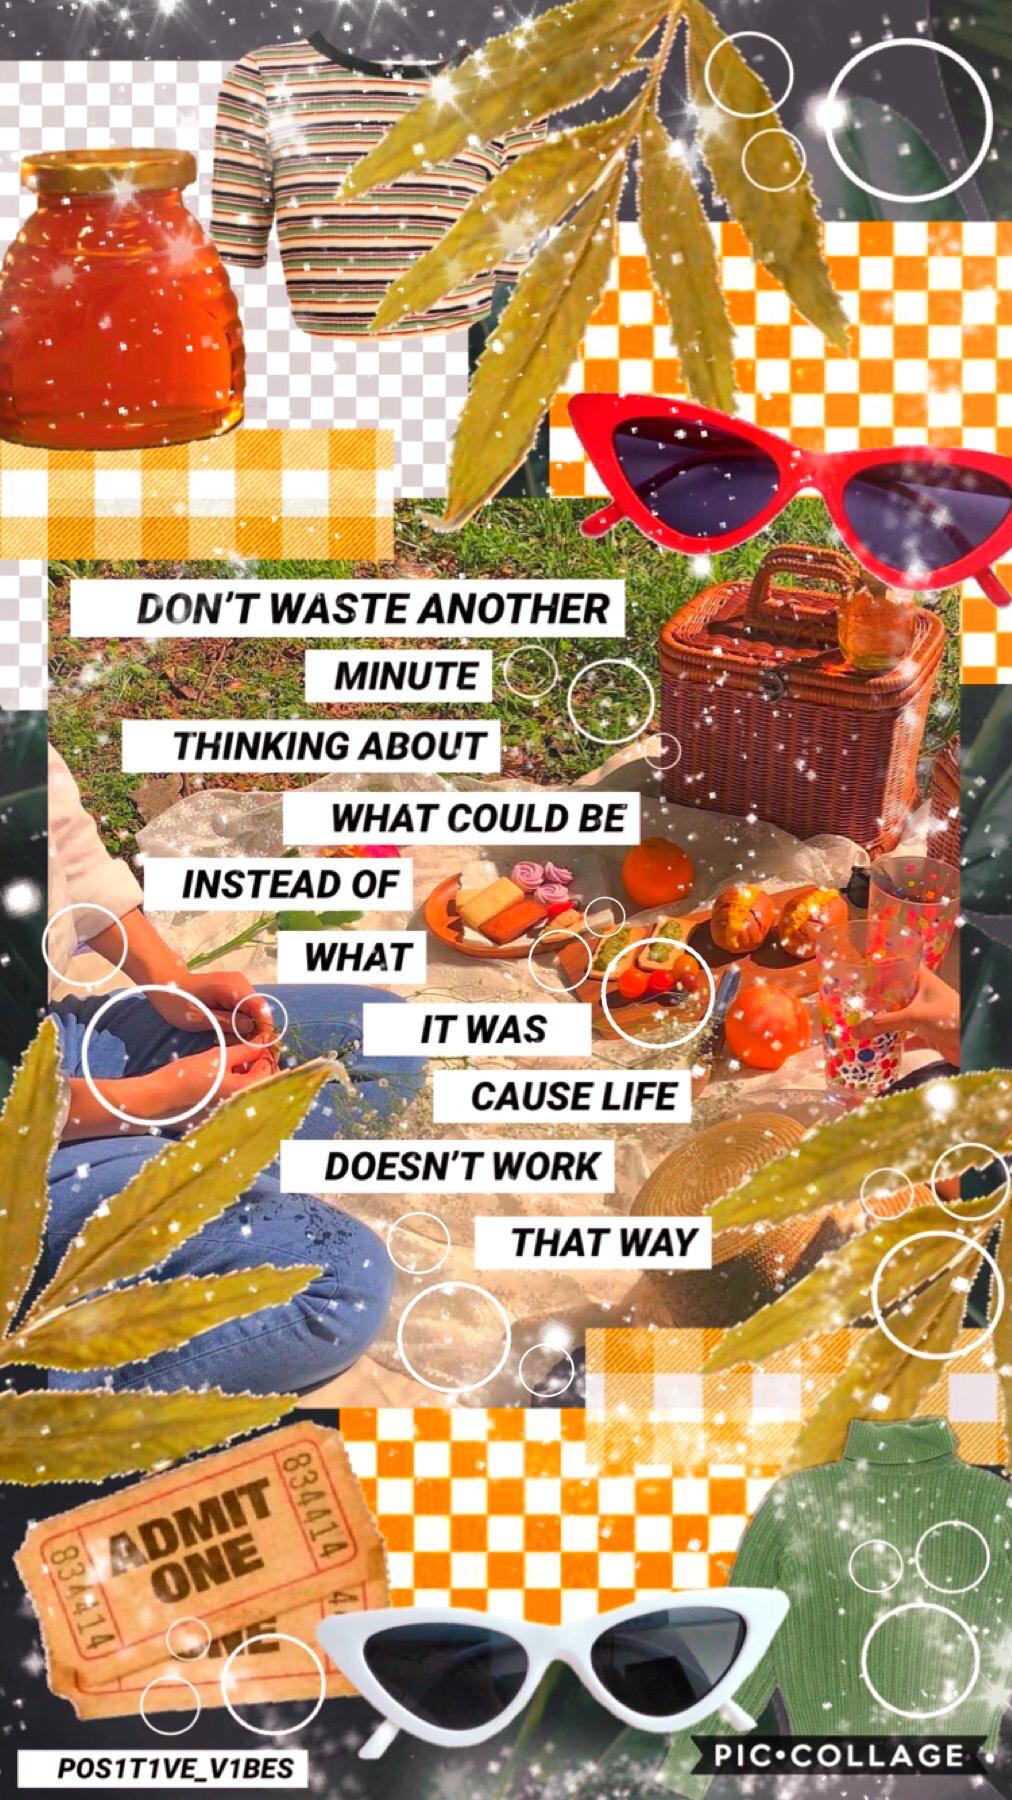 💫lol sorry for this cluttered collage ¯\_(ツ)_/¯ 💫guESS whAT I’m dancing at my cousins wedding next month w my sisters aHHH all my aunts be judging us haha💫I’m acting for my english class ahjsj gl to me hopefully I don’t screw up💫
#PCONLY
#CLUTTERED
#WEDDI